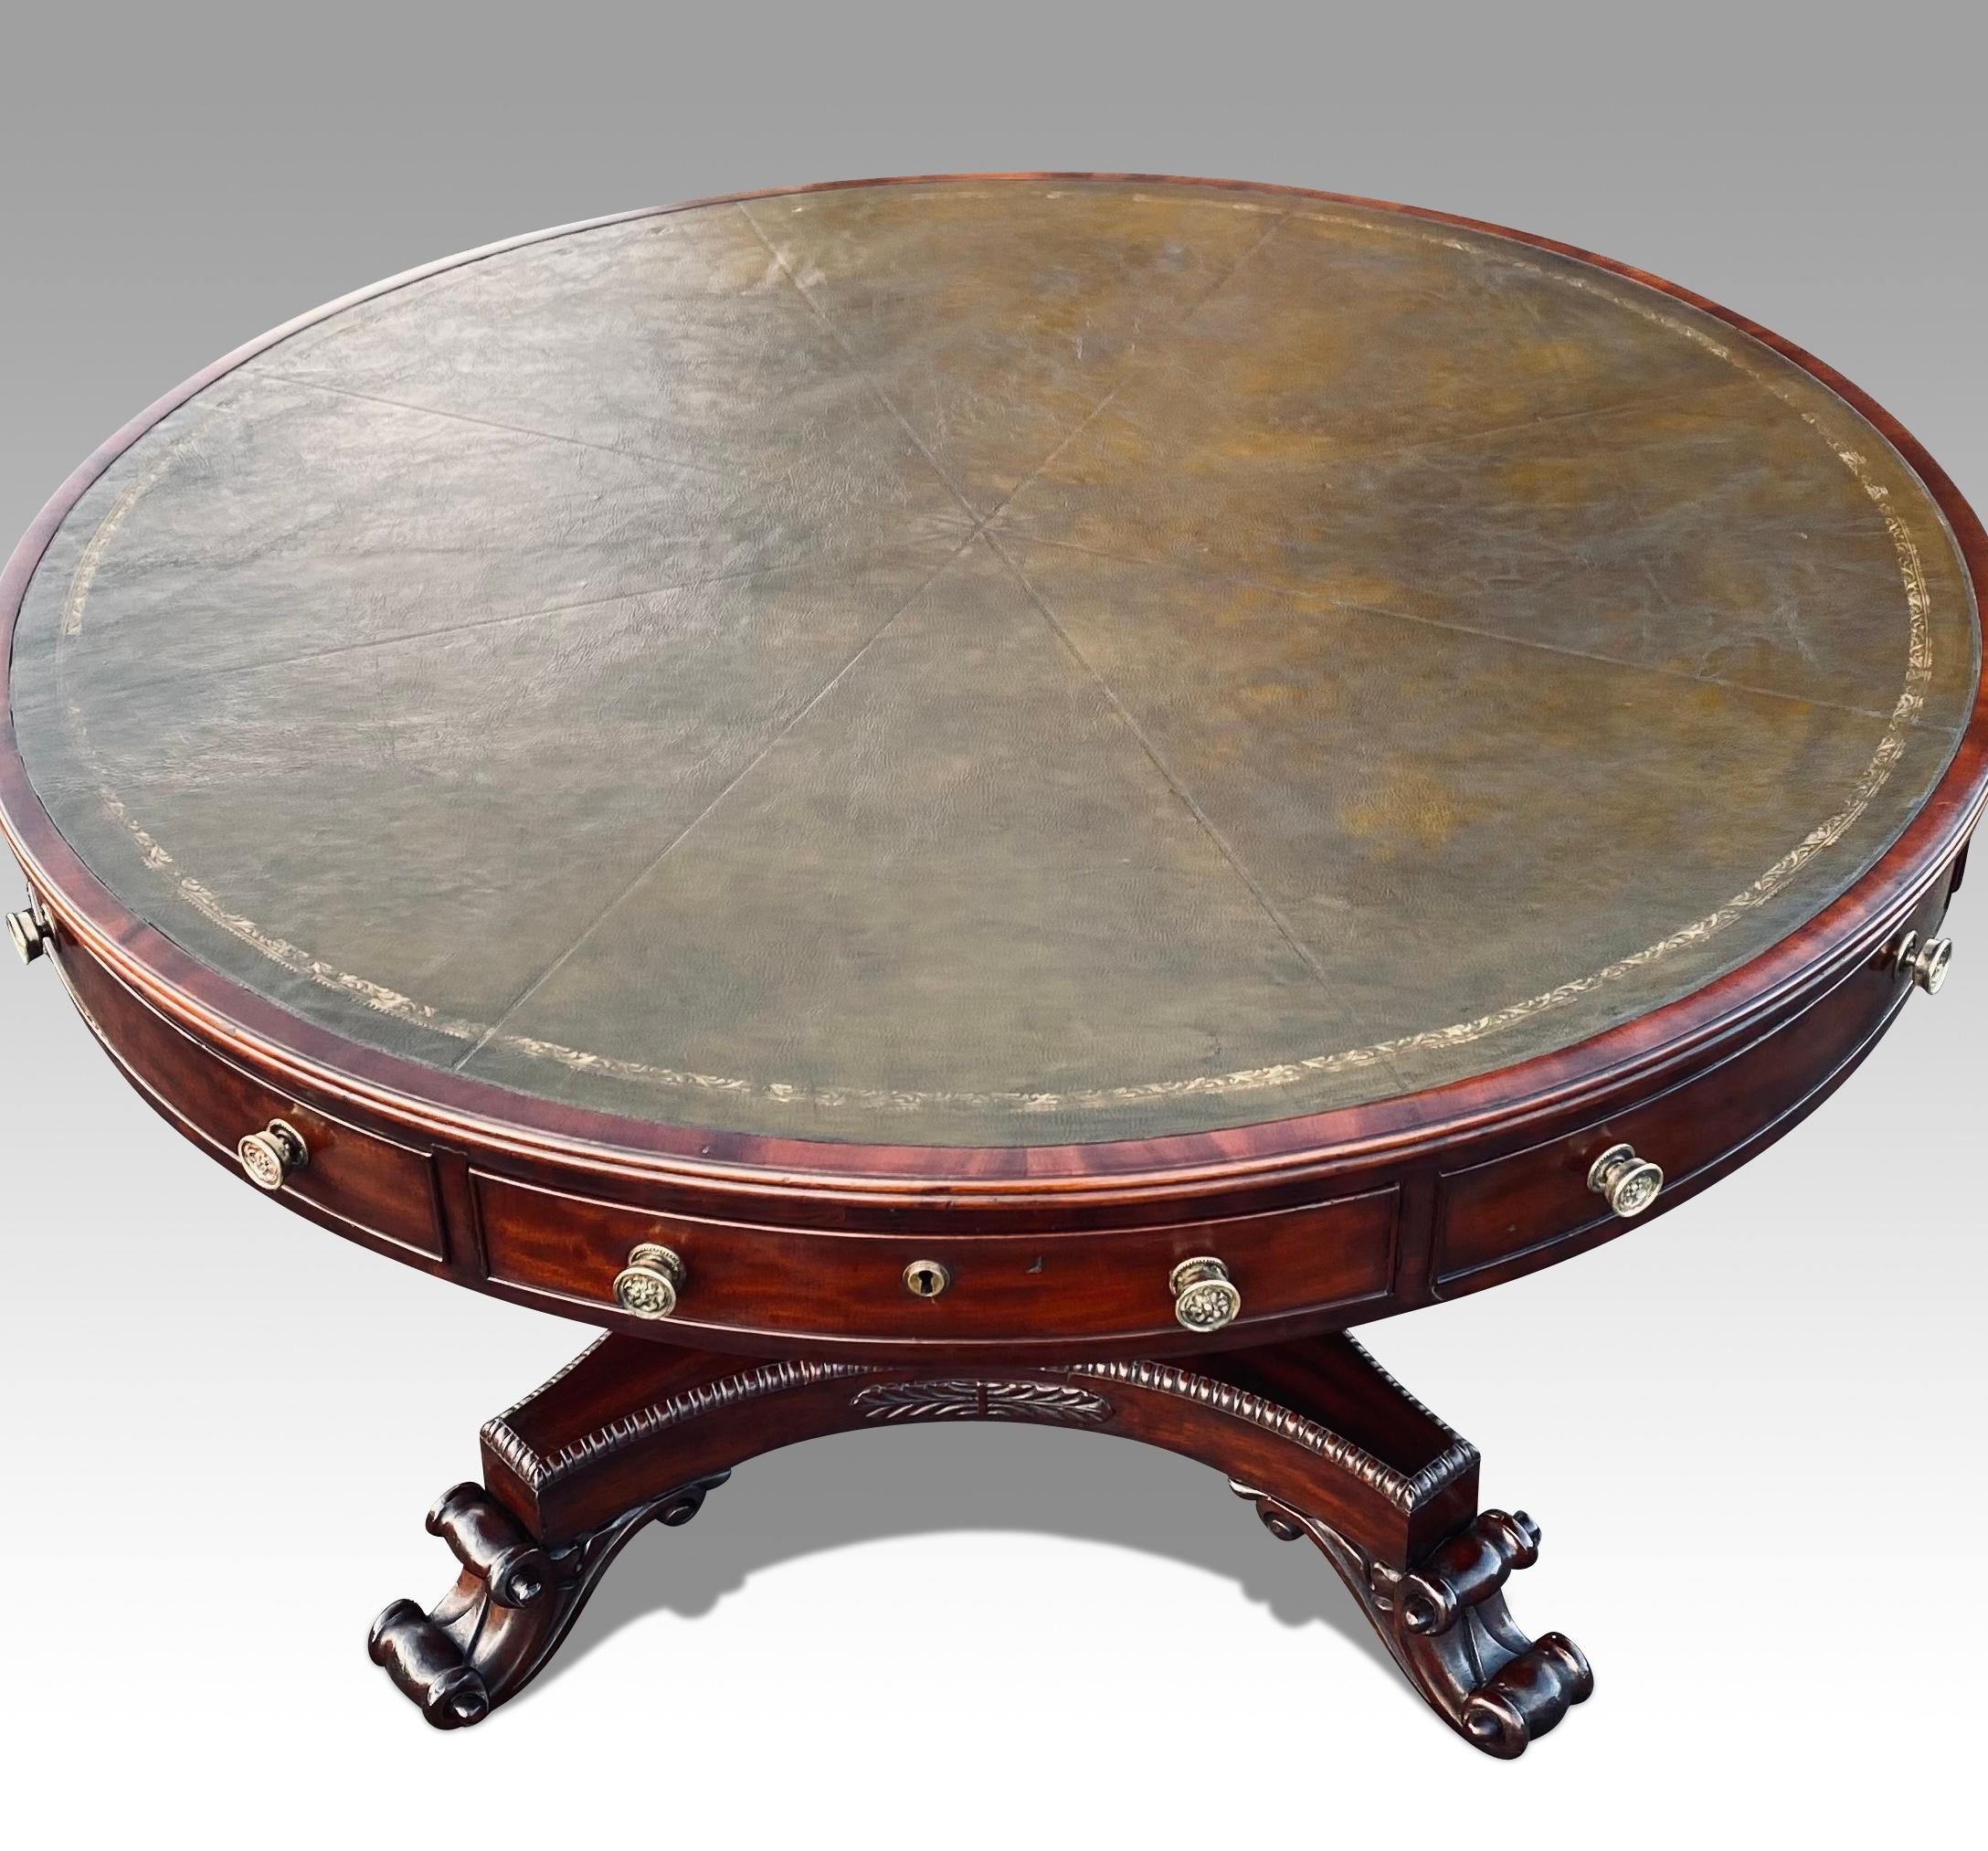 A superb Irish Regency period mahogany drum table in the manner of Williams & Gibton- Dublin.
The leather lined circular top within a crossbanded border with an arrangement of 2 long & 2 short drawers with opposing dummy drawer fronts.
The drawers